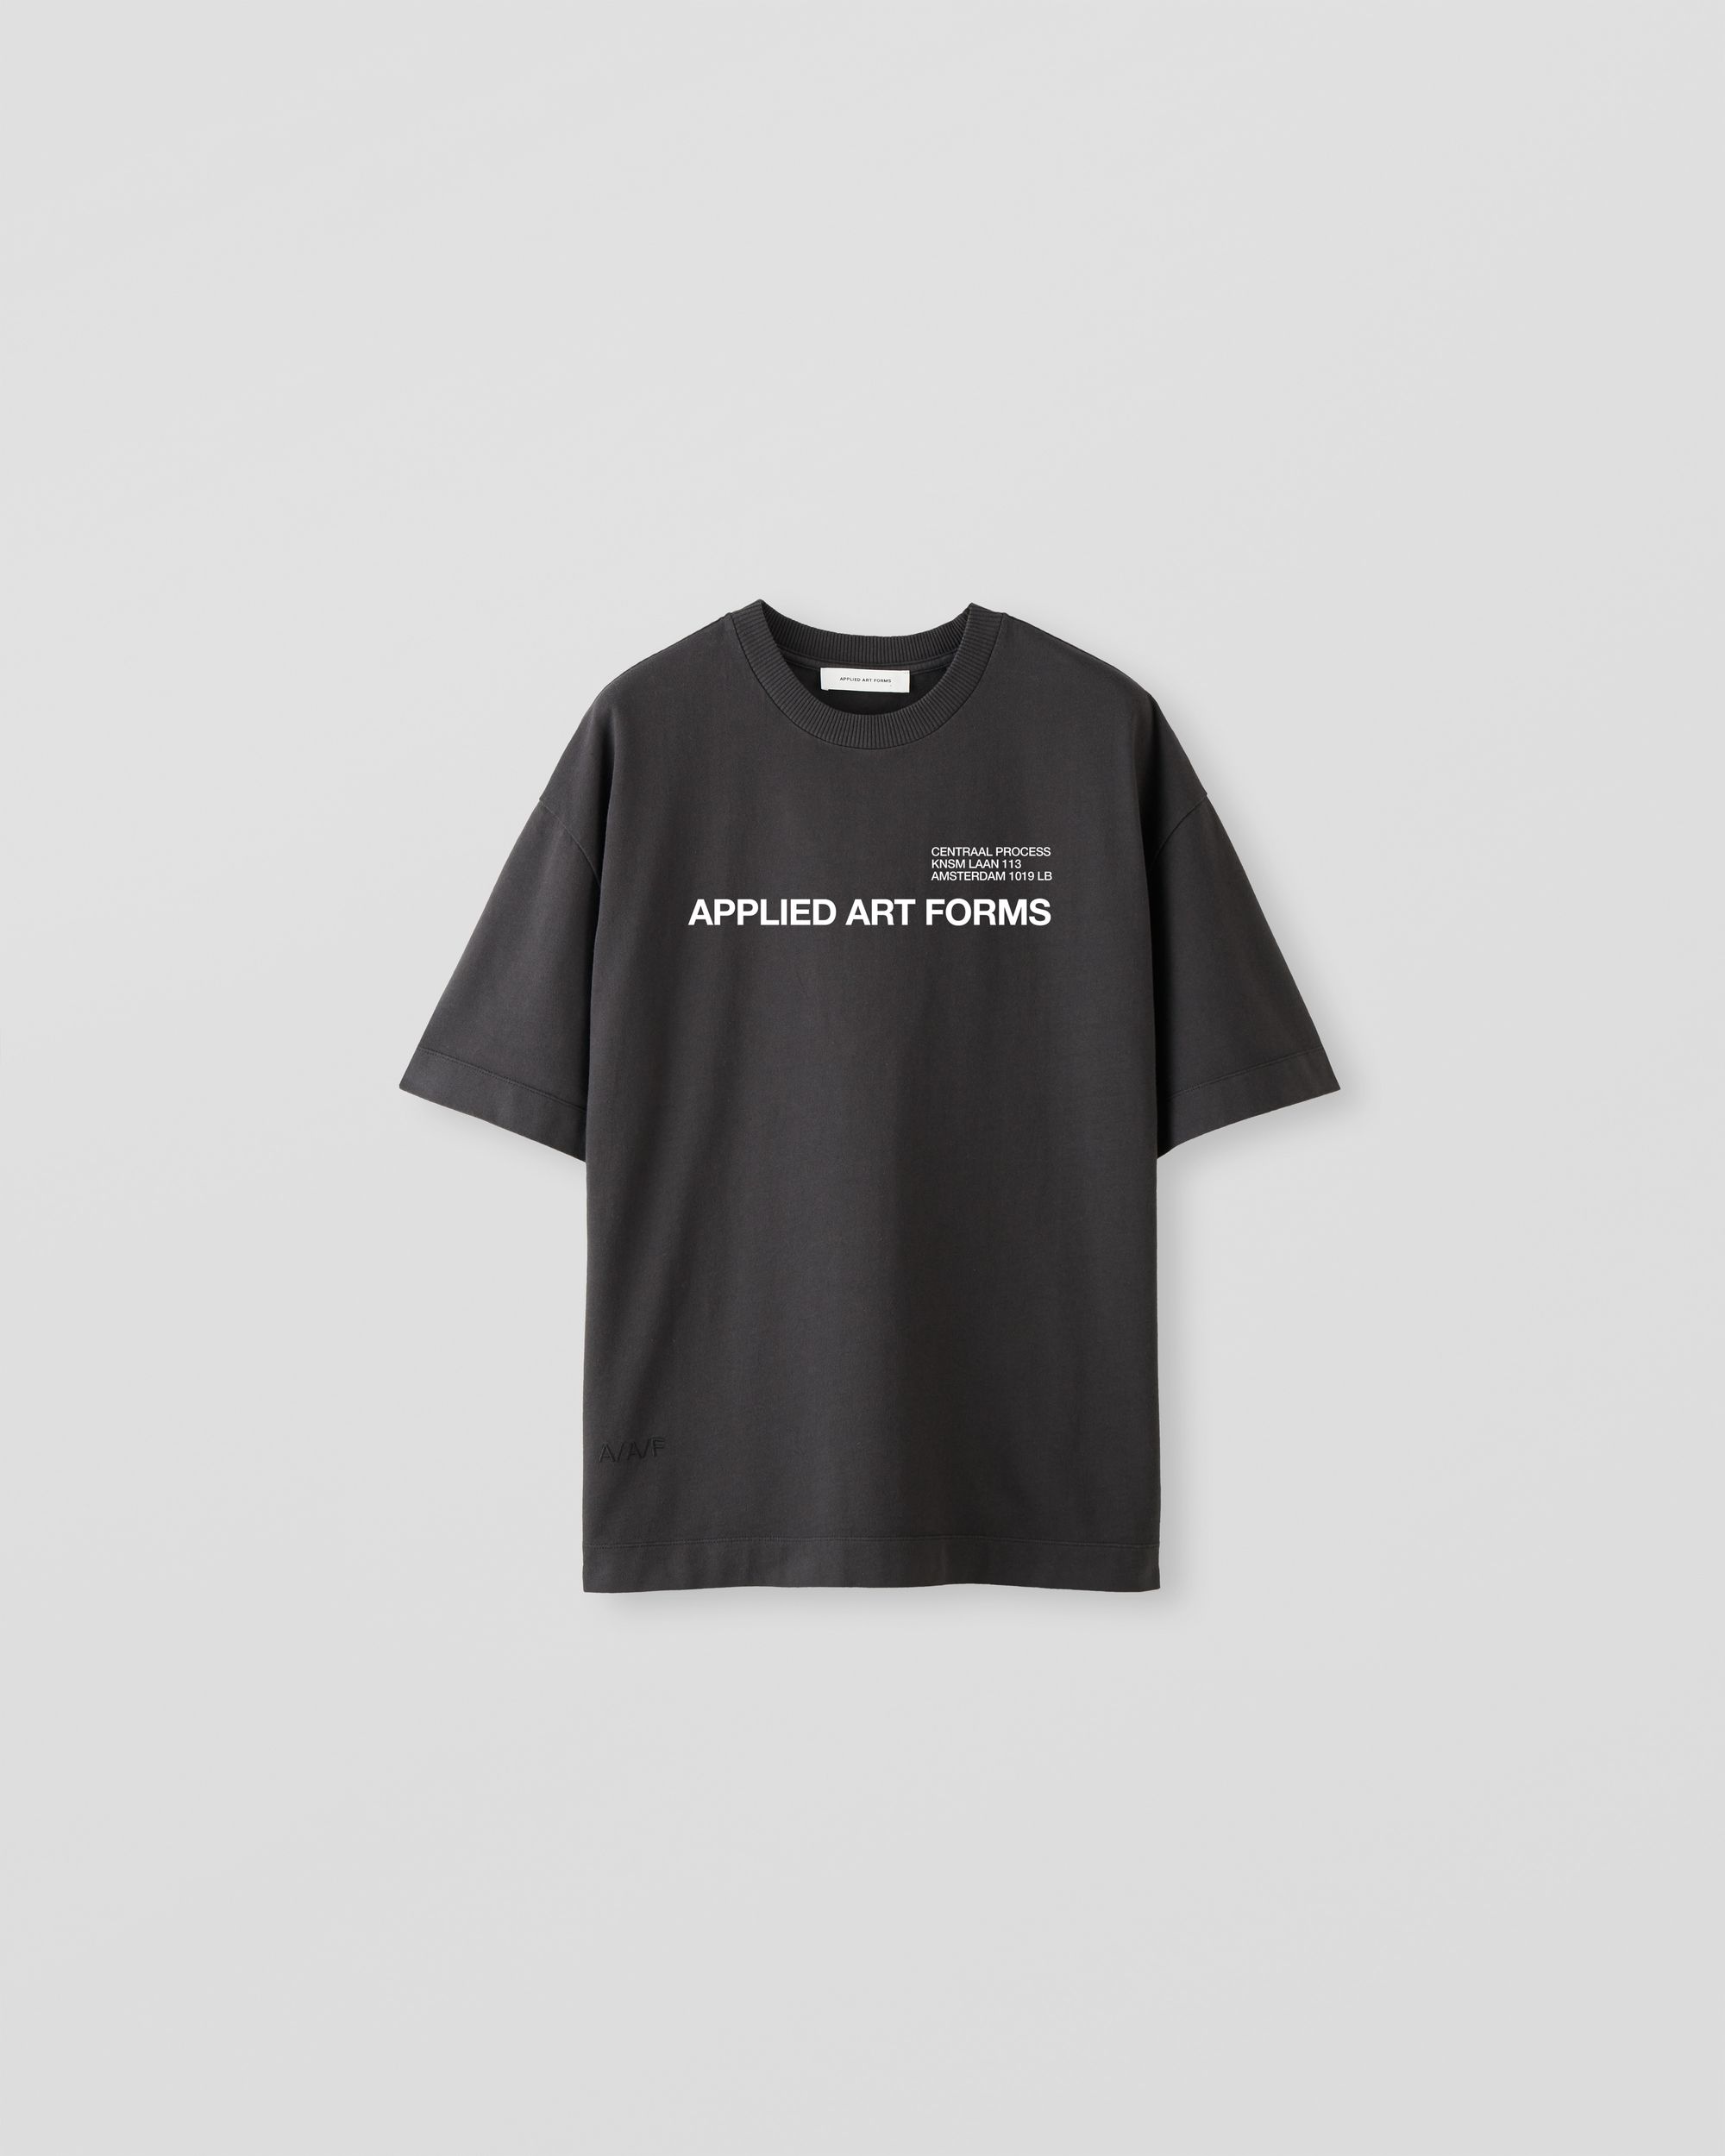 APPLIED ART FORMS LM1-1 T-shirt [Logo] Charcoal